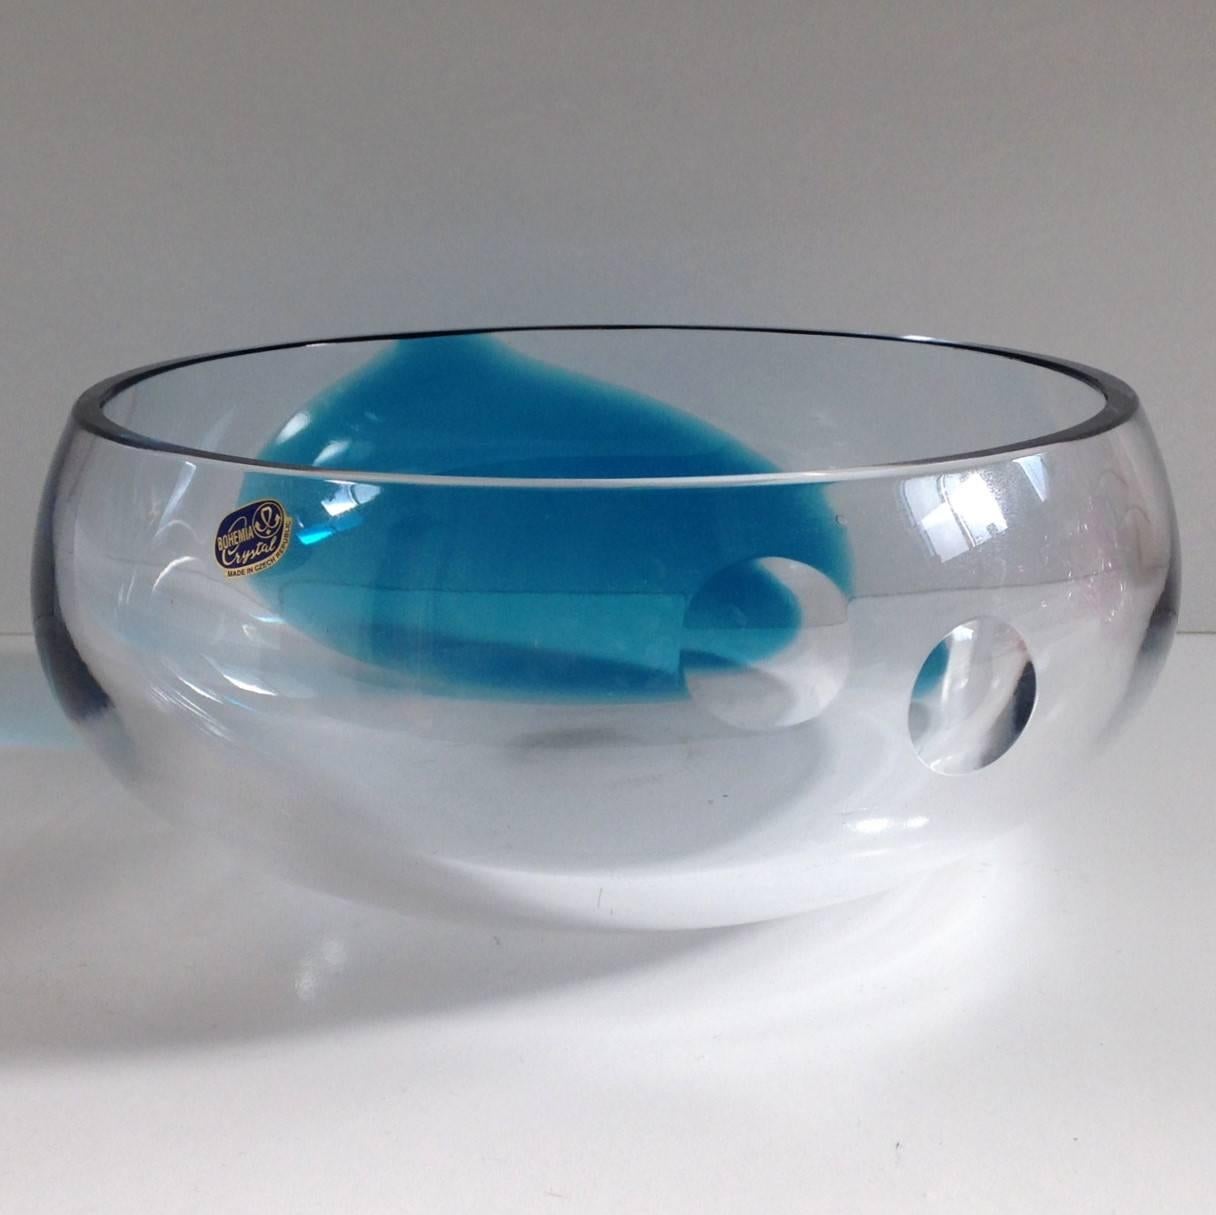 Vintage blue and clear handblown Bohemia crystal glass bowl, with original sticker
Diameter: 10 inches / Height: 4.5 inches
1 in stock in Palm Springs
This piece makes for a great and unique gift!!!
Order Reference #: FABIOLTD G52